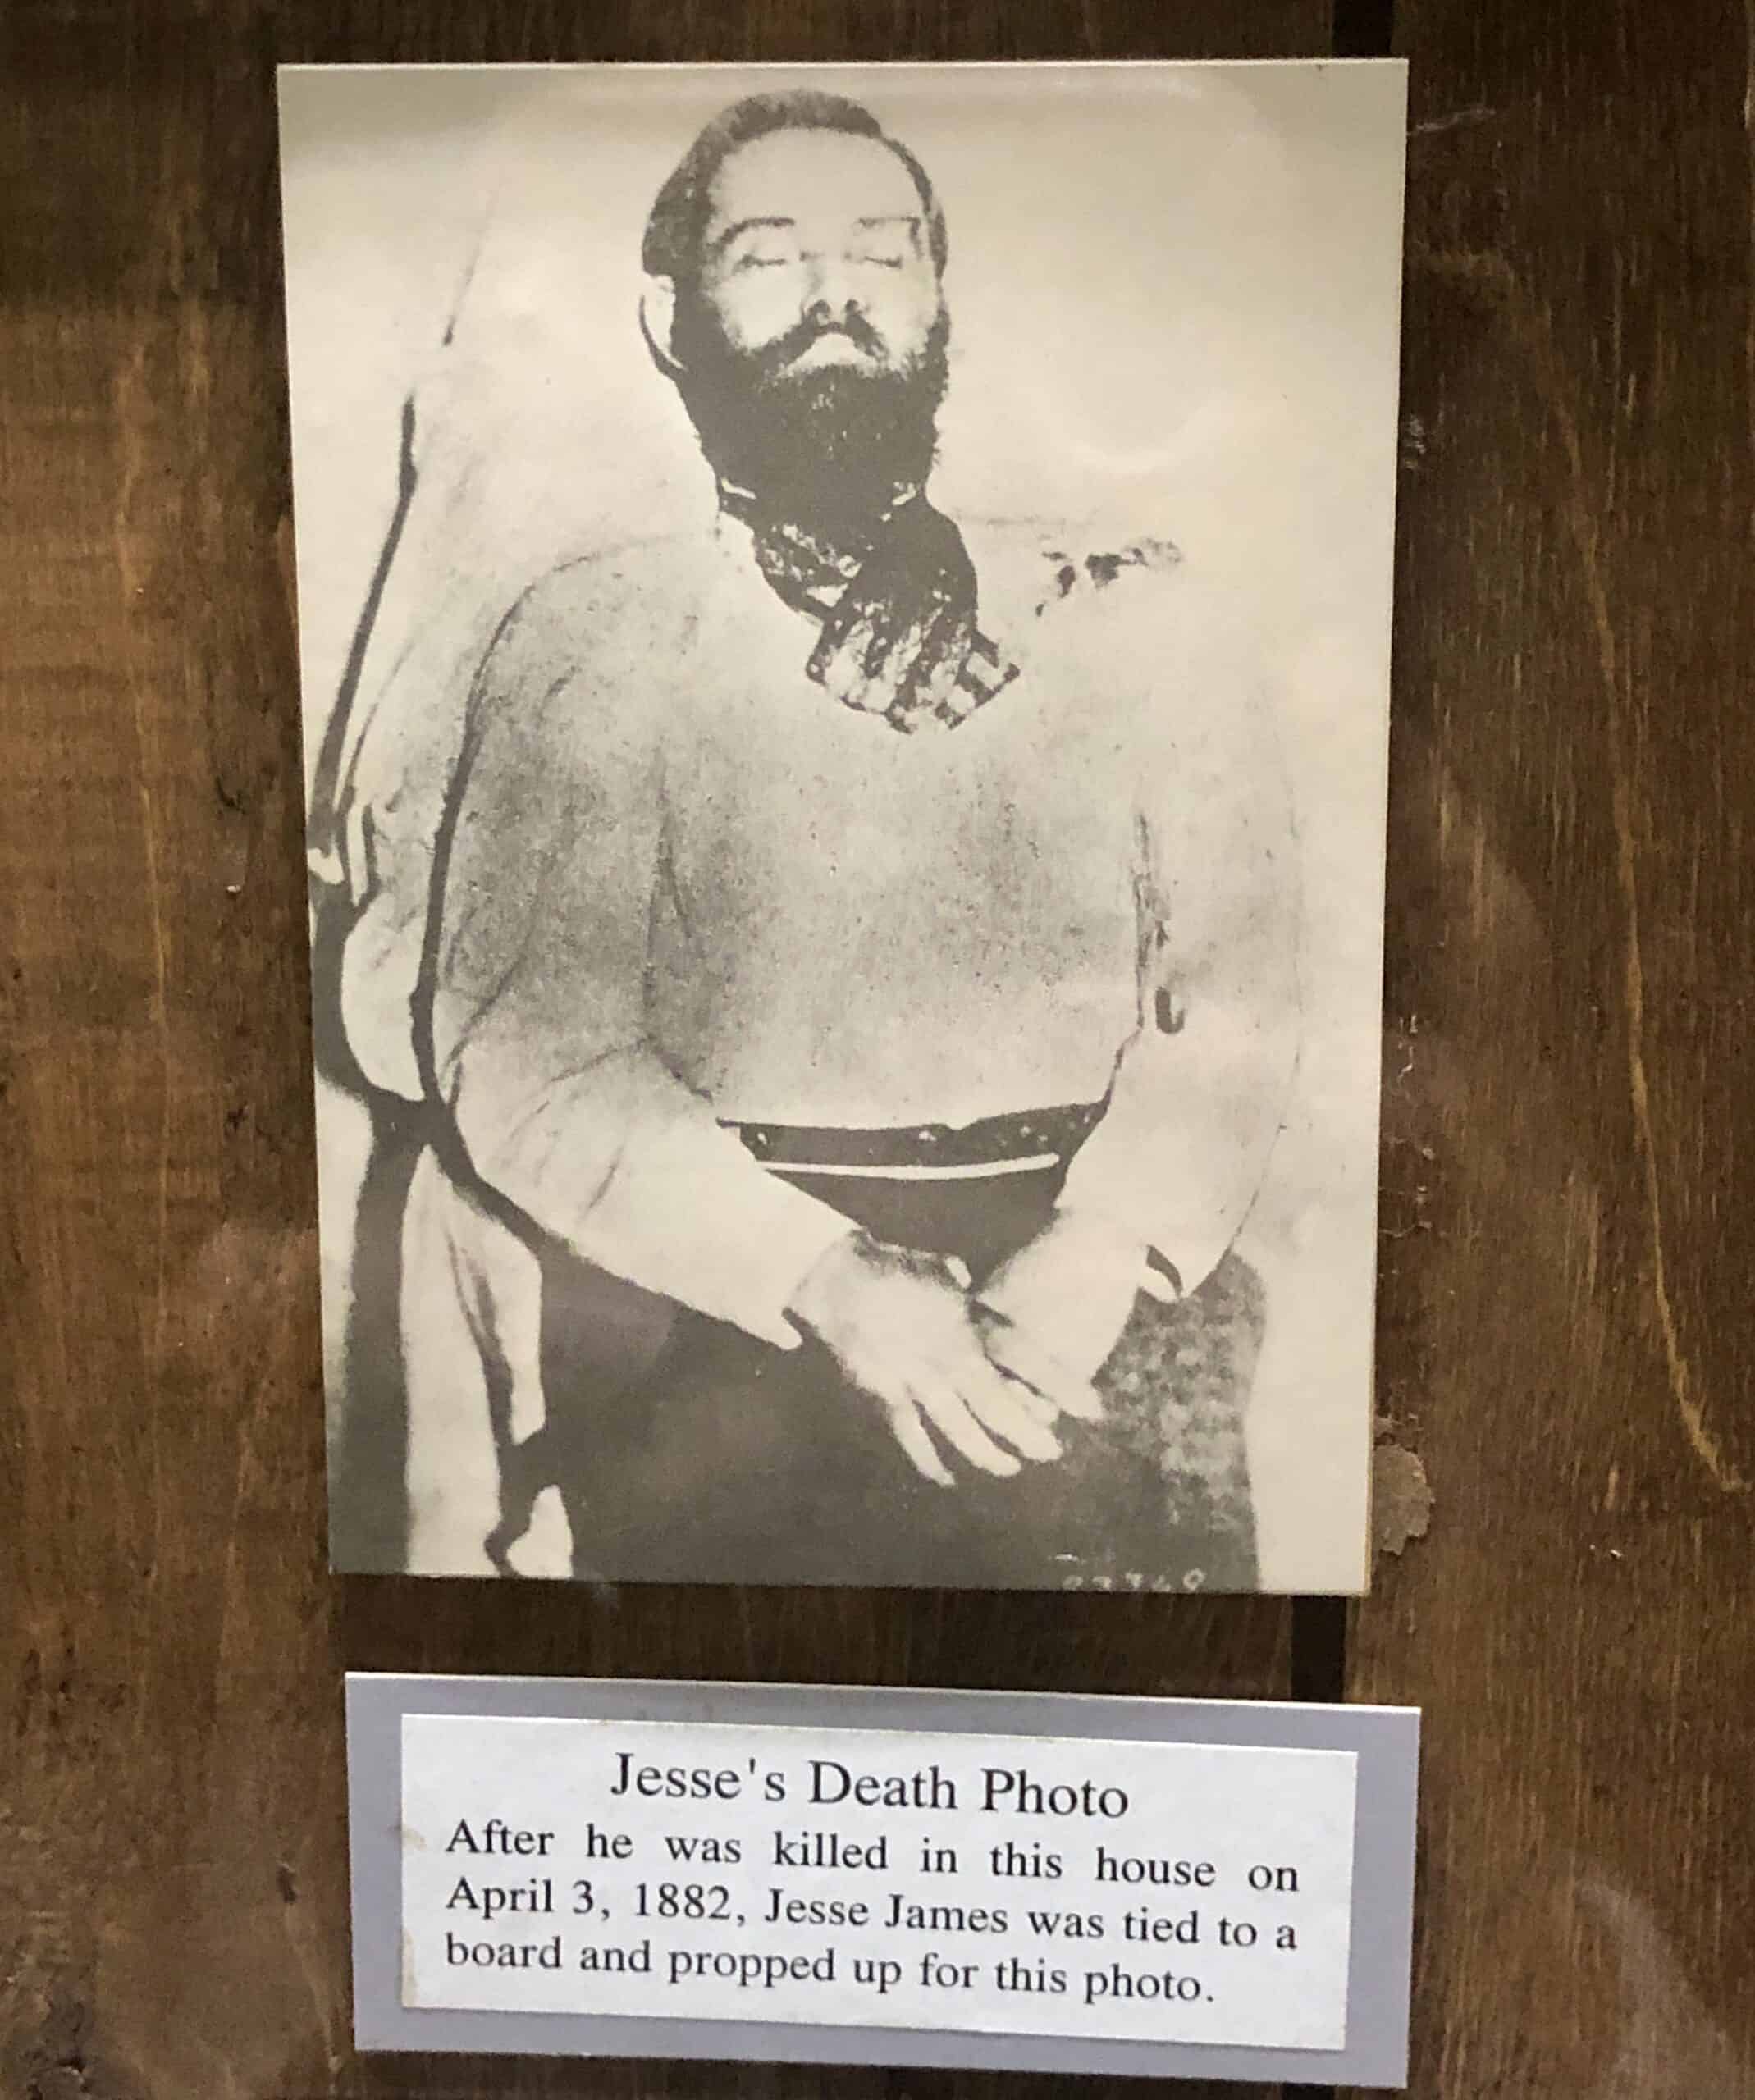 The murder site of Jesse James